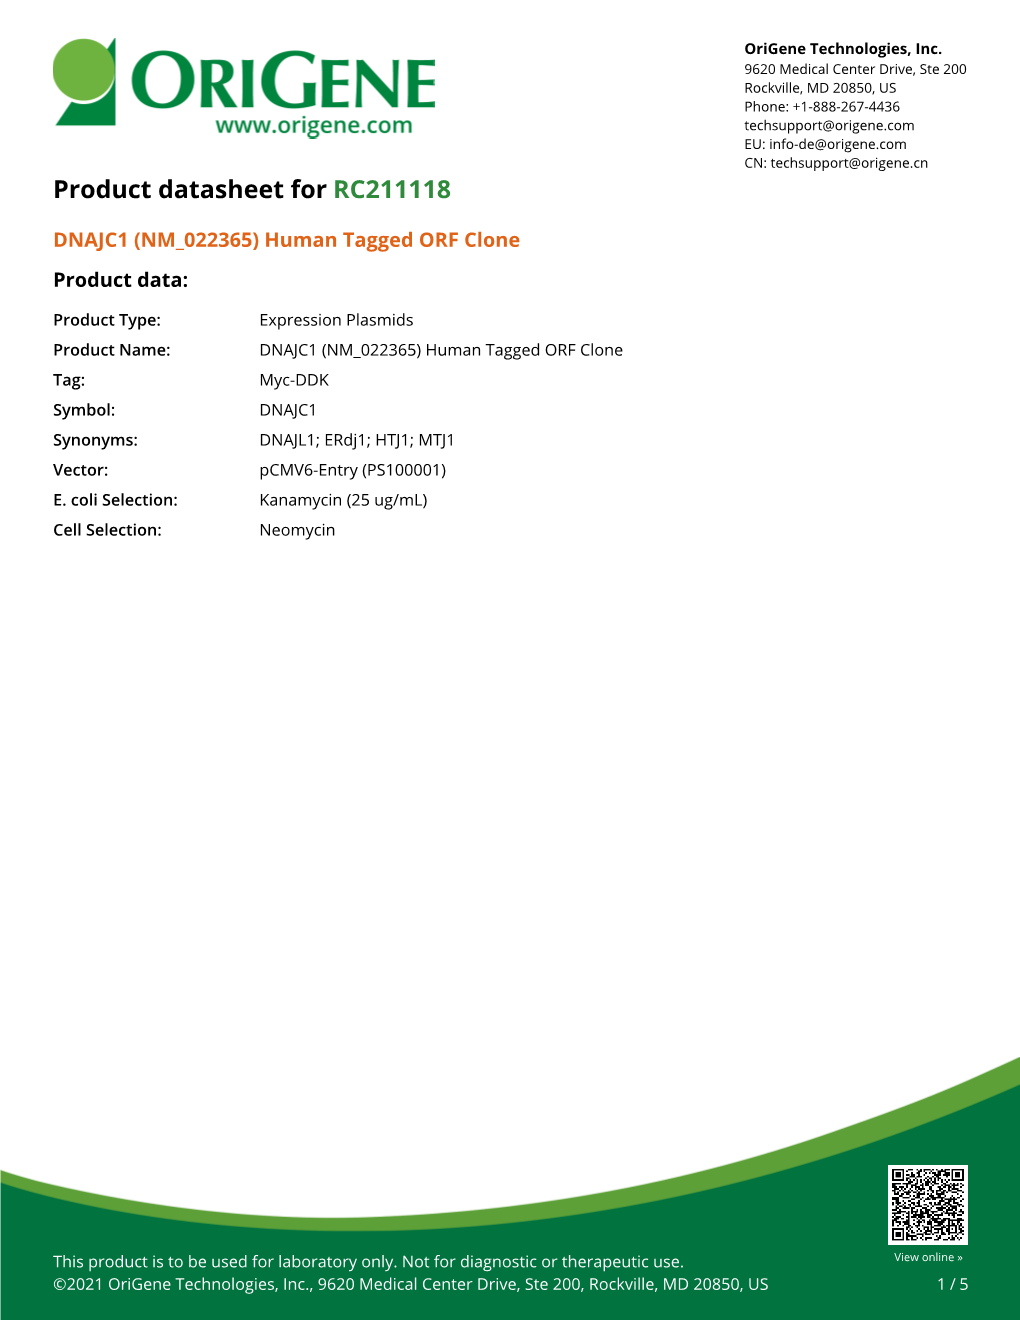 DNAJC1 (NM 022365) Human Tagged ORF Clone Product Data